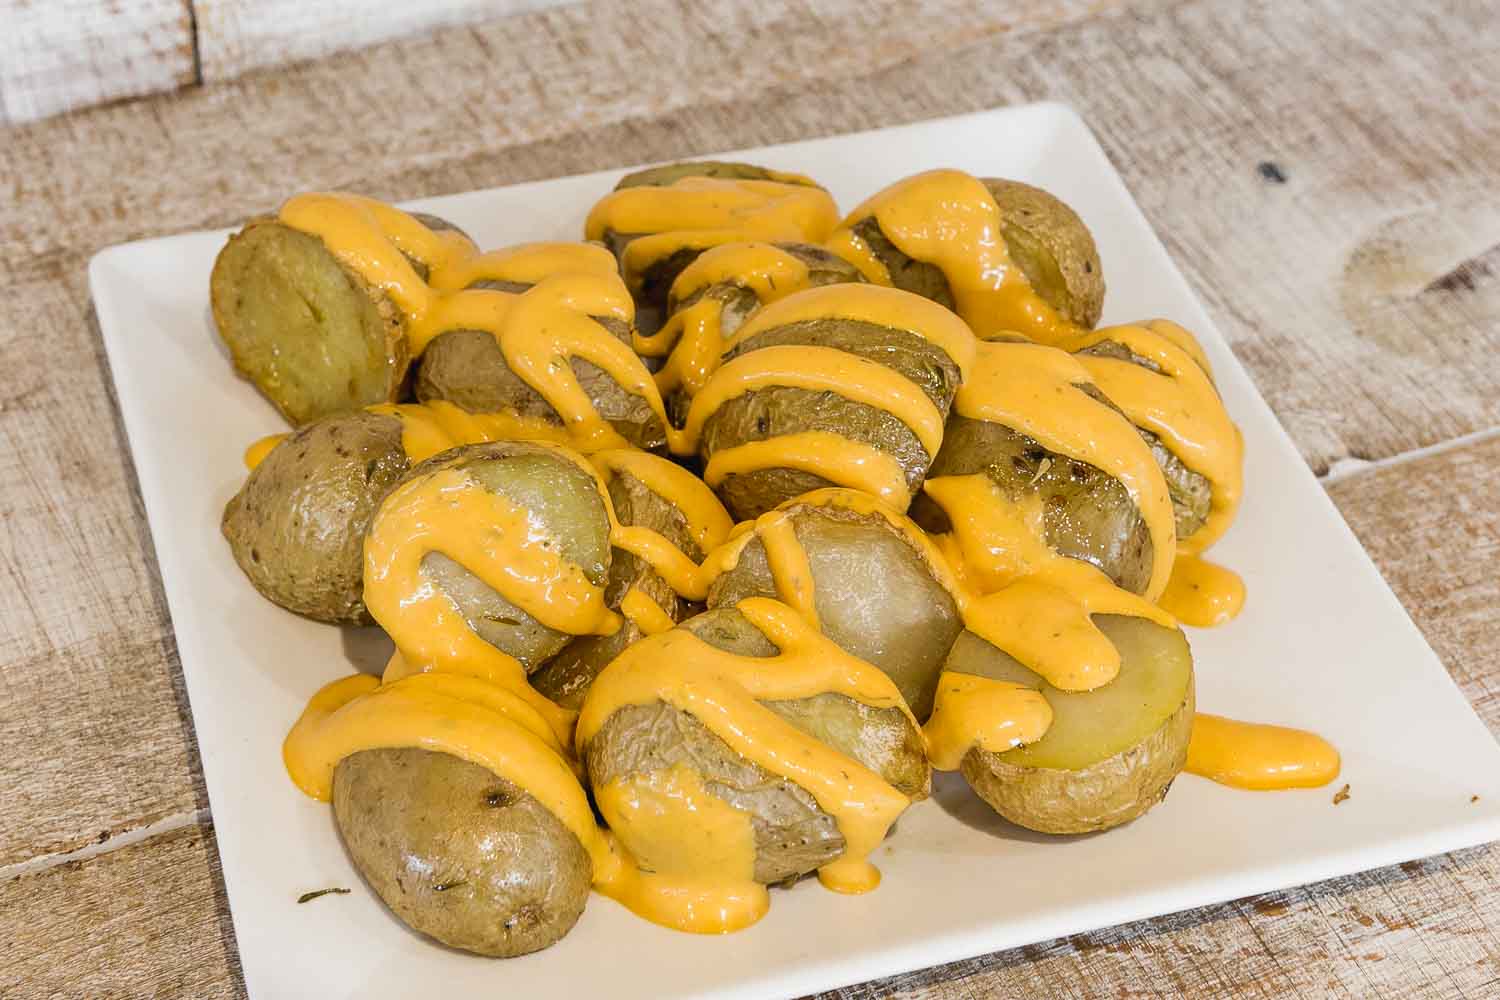 Country Potatoes with gaucha, roque or brava sauce